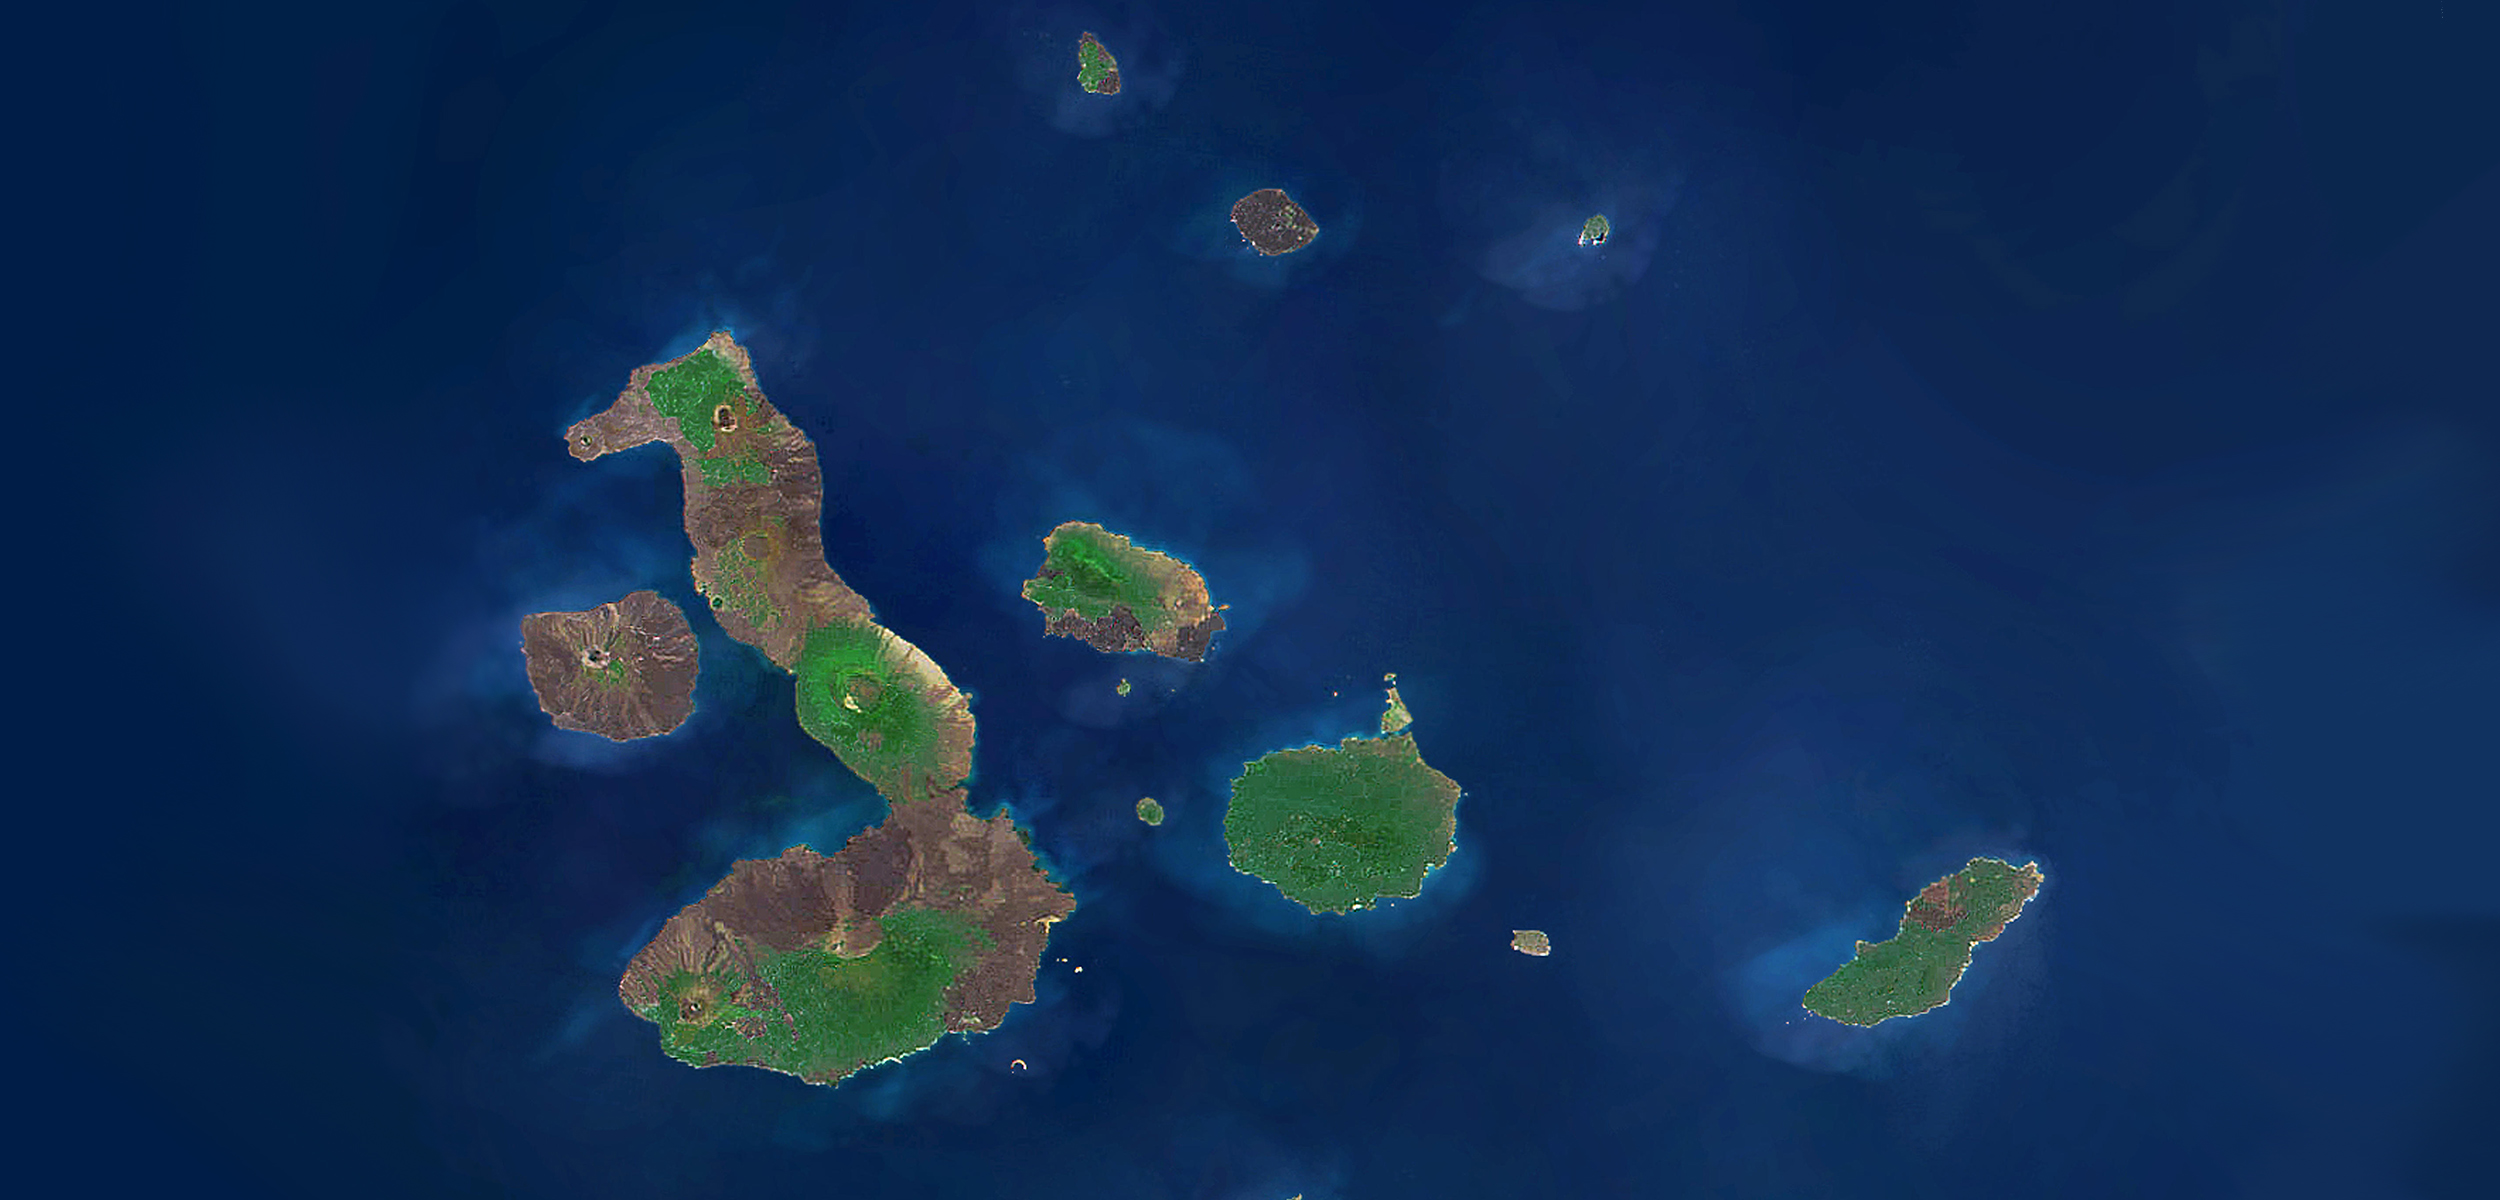 A satellite view of the Galapagos Islands with a dark blue ocean and green islands.